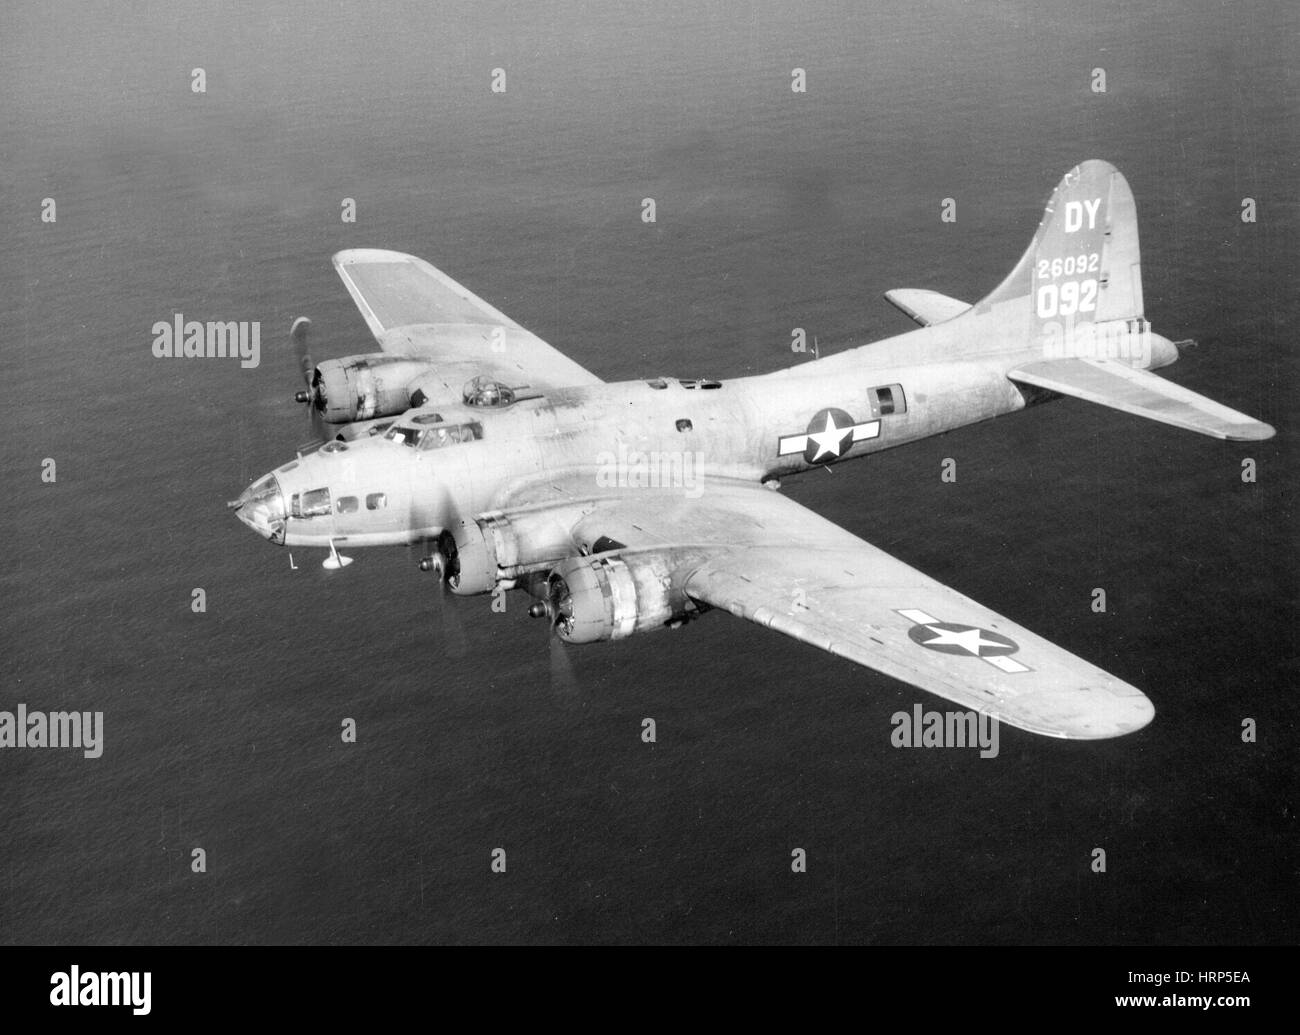 WWII, Boeing B-17 Flying Fortress, 1940s Stock Photo